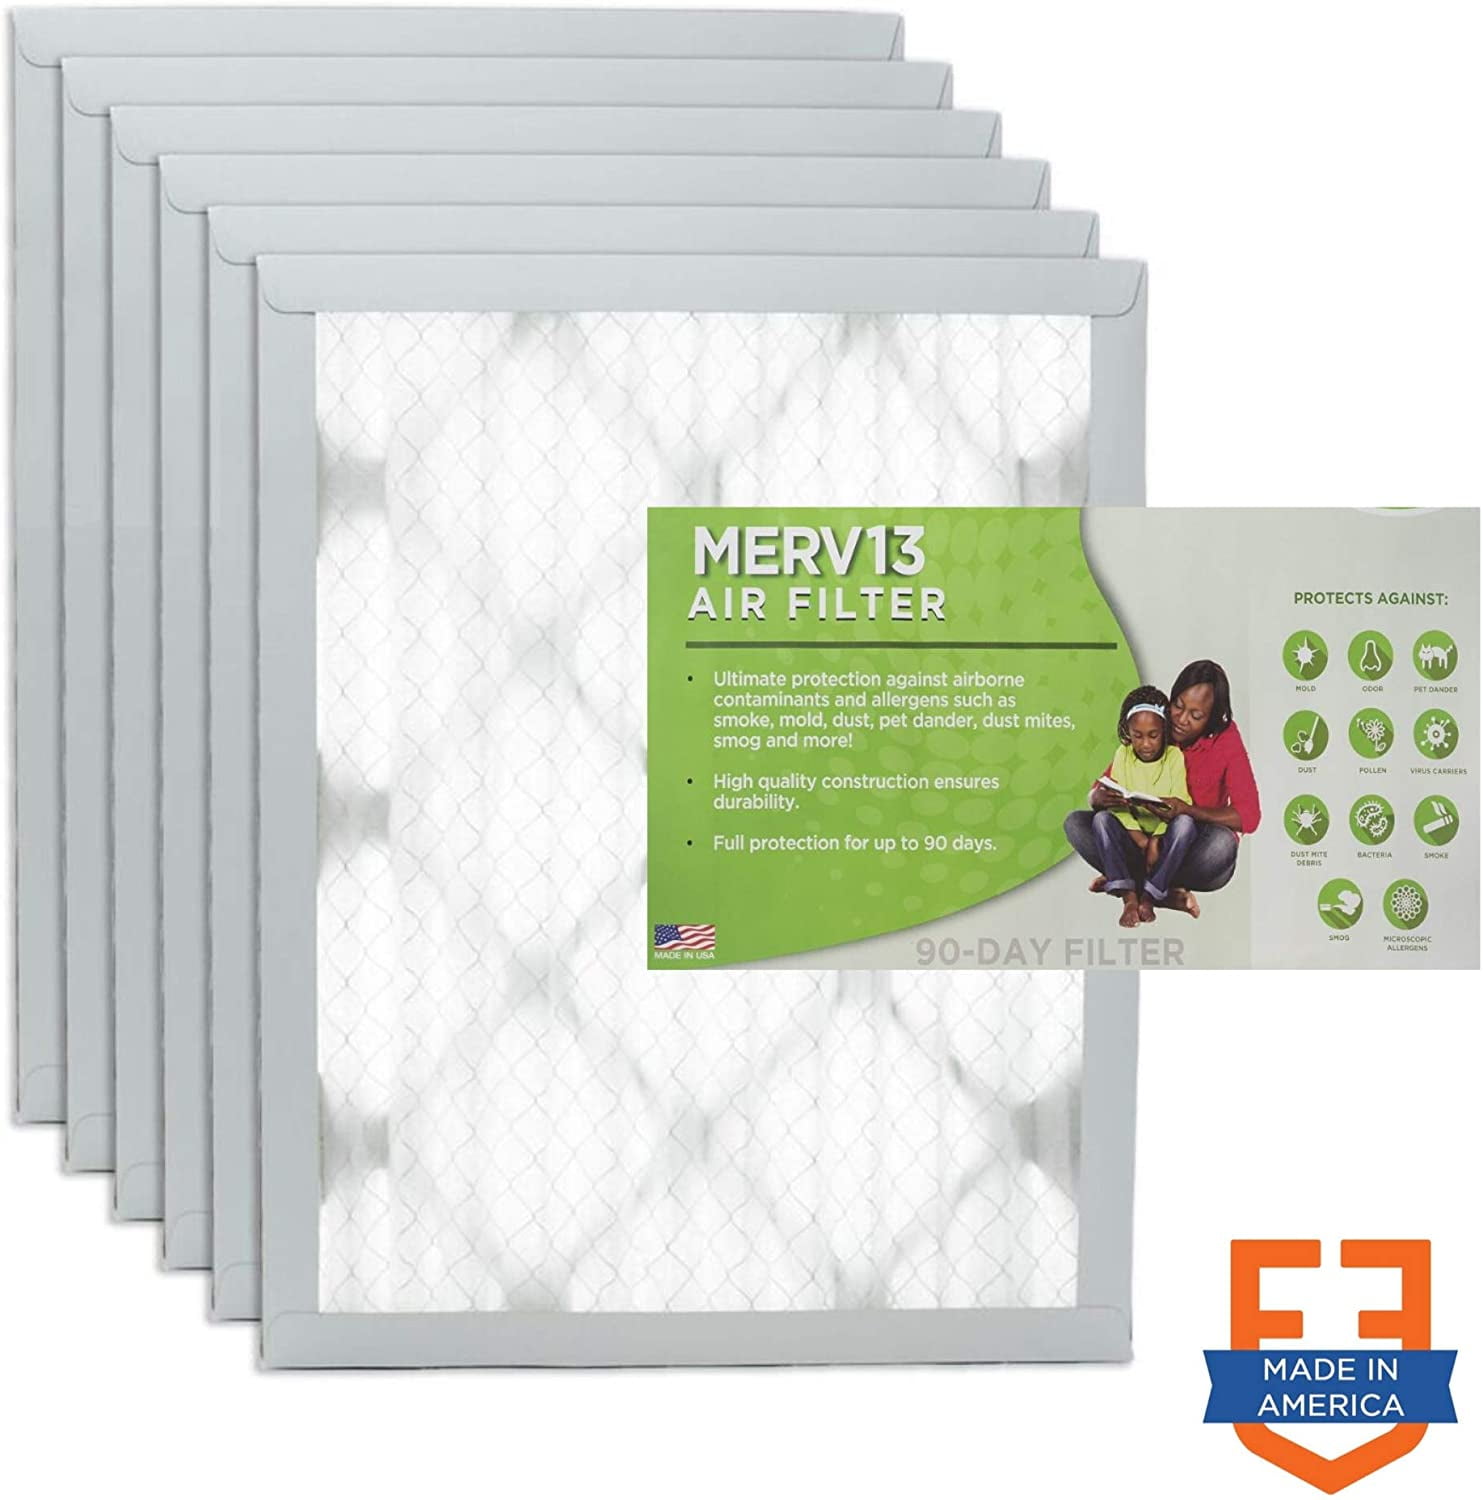 Made in the USA by American Filter Company 12x22x1 Furnace/AC Filter MERV 13 2 Packs 